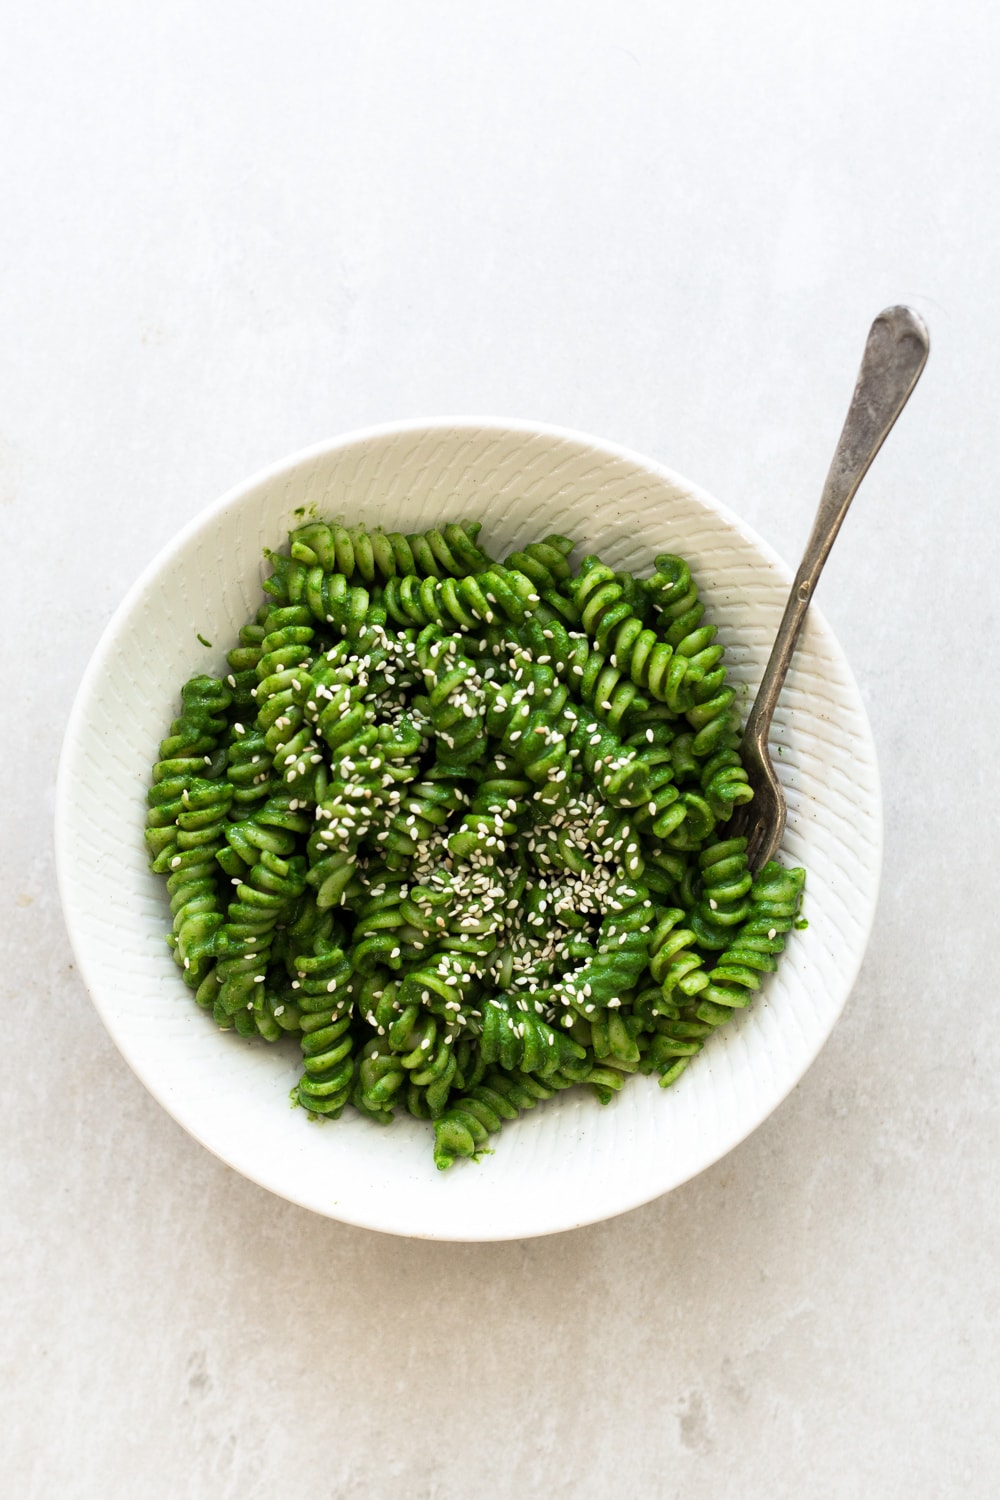 A simple Miso Pesto Pasta recipe made in under 15 minutes. Dairy Free, Vegan and loaded with Baby Spinach and Cilantro. Yum! #vegan #pesto #miso #asian #pasta #veganpesto #pestopasta #healthy #simple #easy #quickrecipes